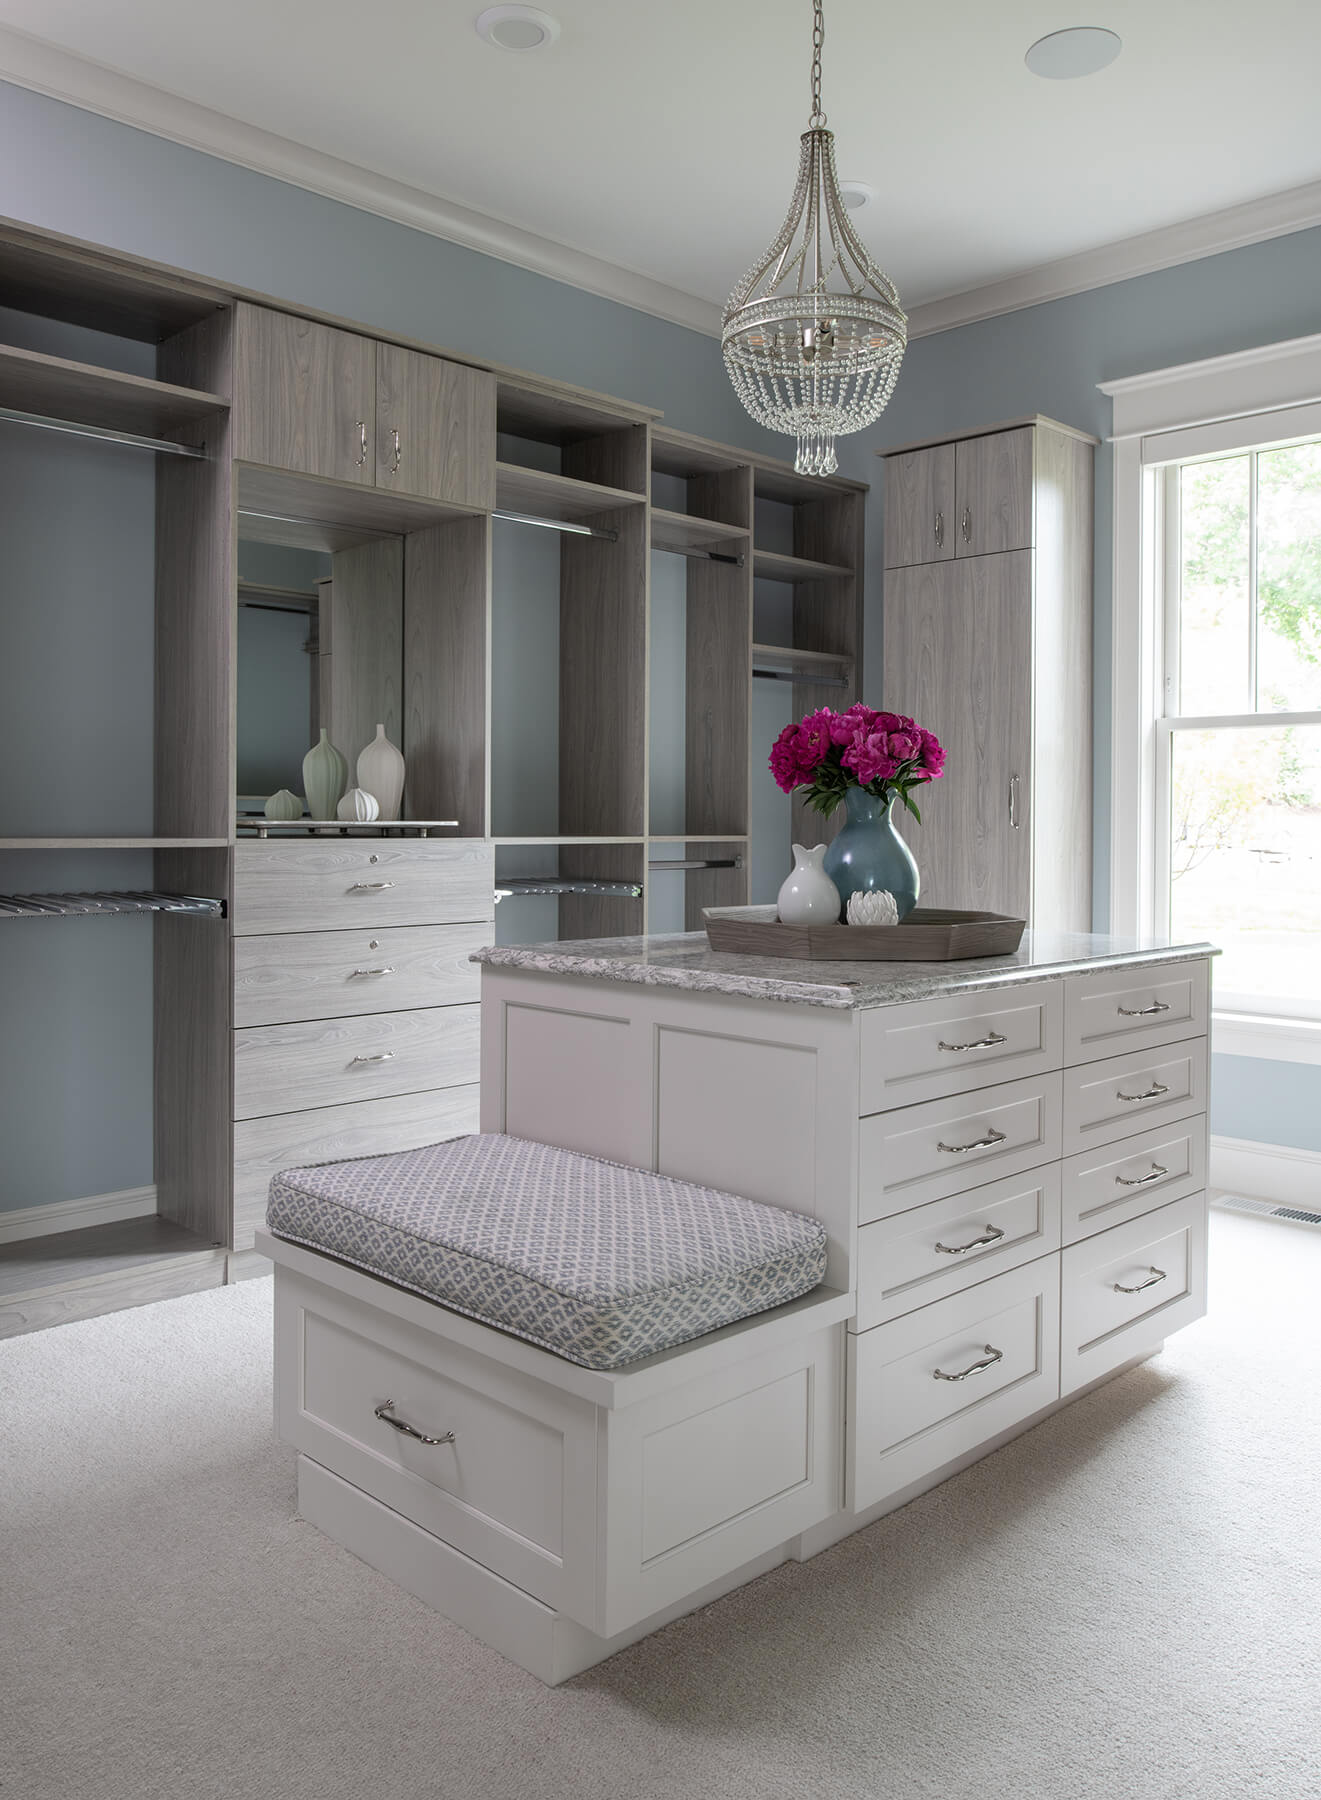 A bright and inviting walk-in closet design with custom cabinetry from Dura Supreme in a light gray texture with a white painted closet island with a built-in boot bench.